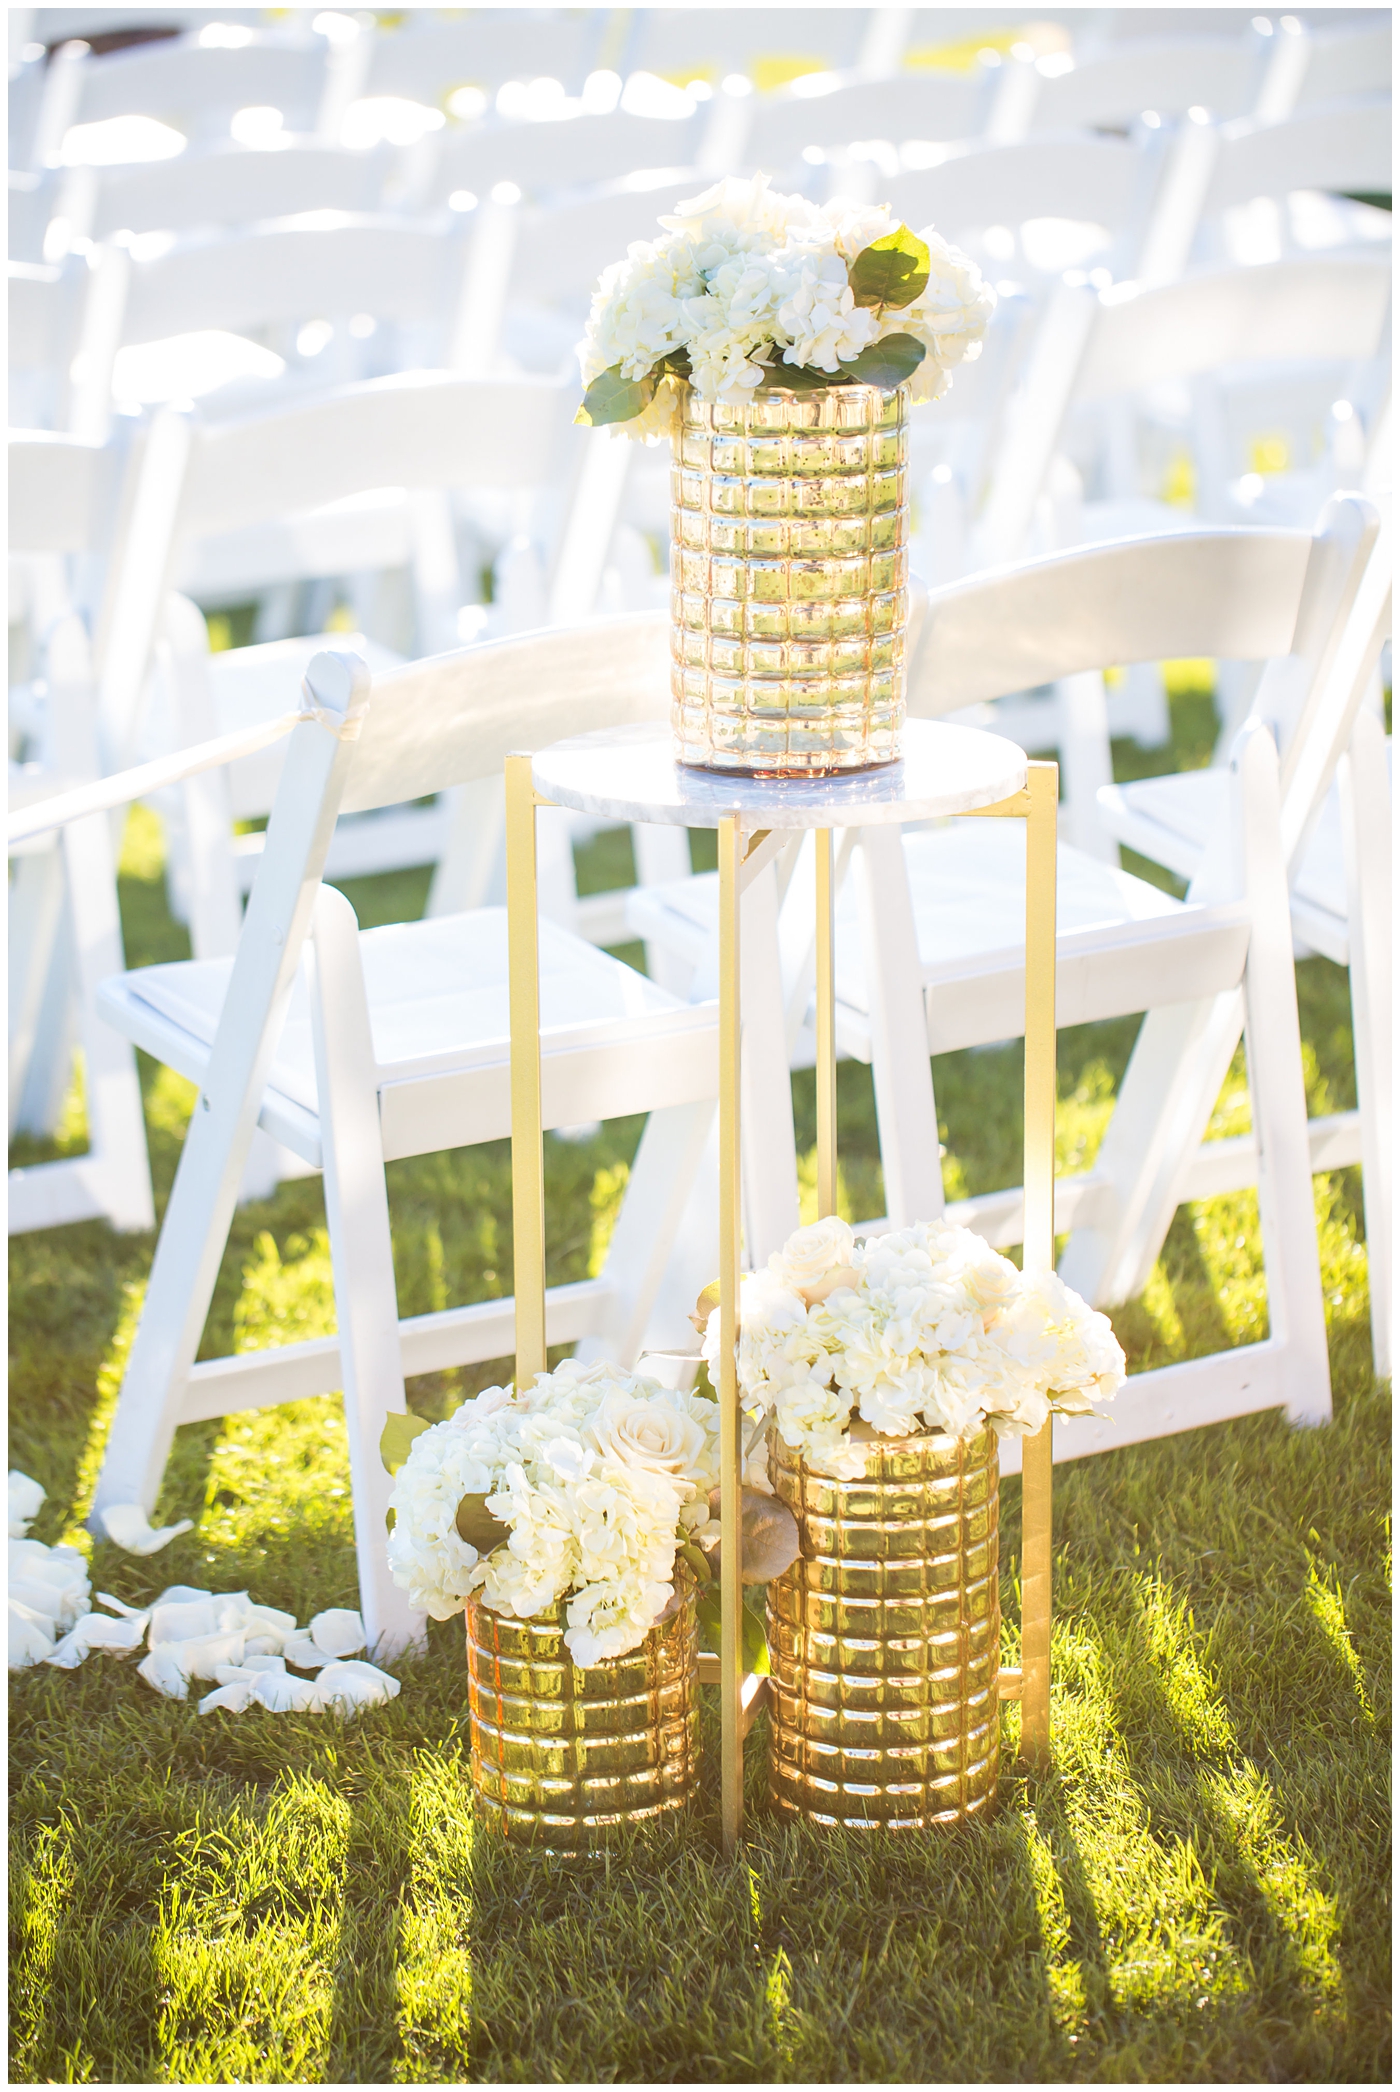 gold vases with white roses in walkway of wedding ceremony aisle